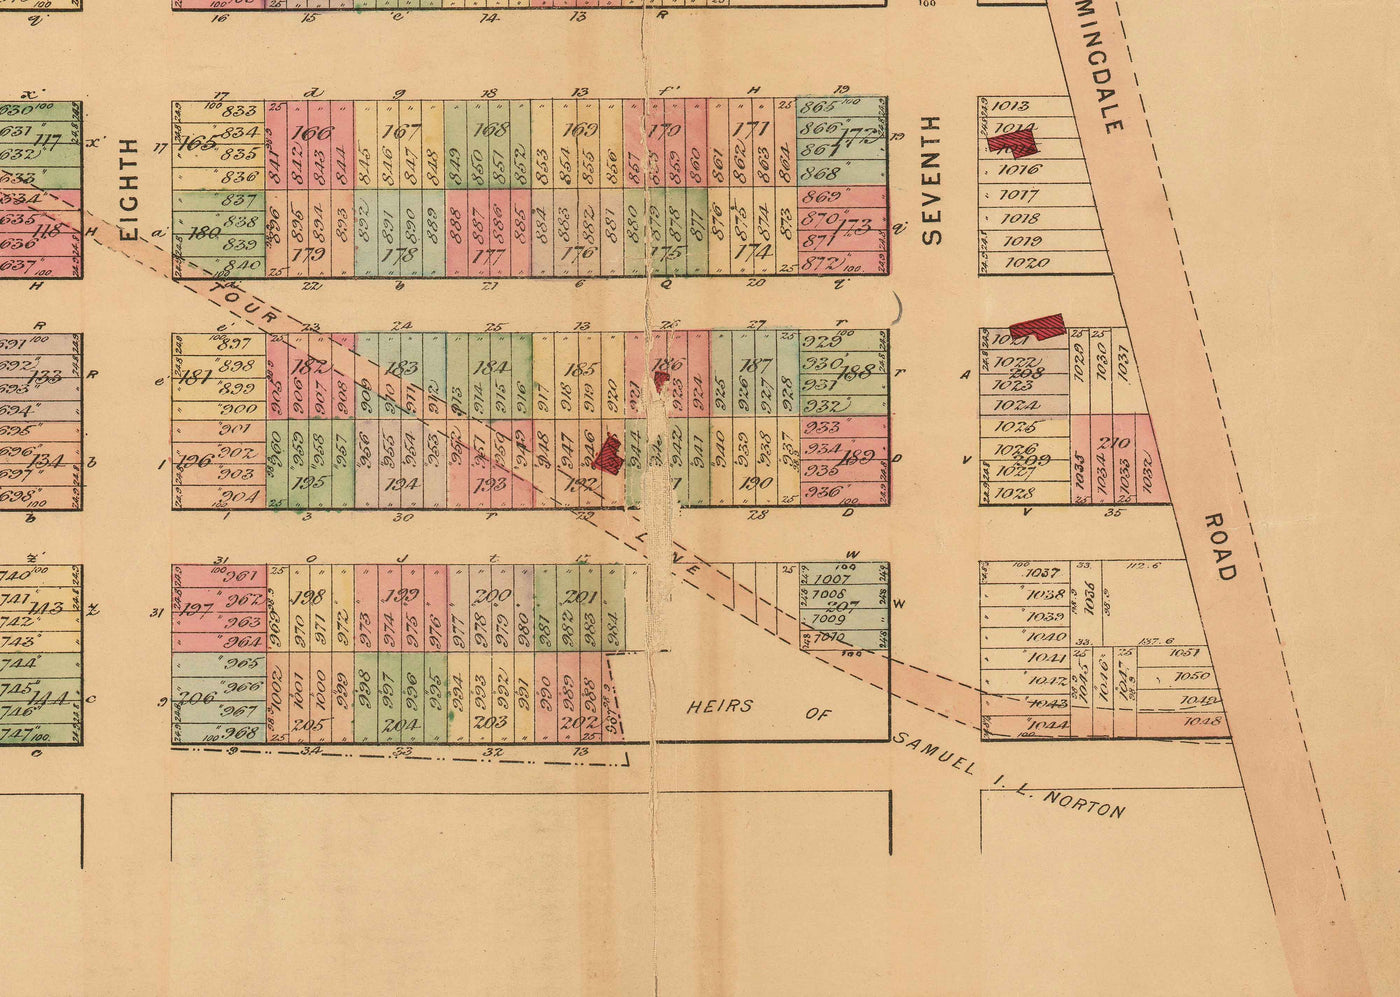 Old Map of Hell's Kitchen & Midtown West, NYC 1872 - Clinton, Manhattan Streets, Heritage Farm, 39th to 48th St